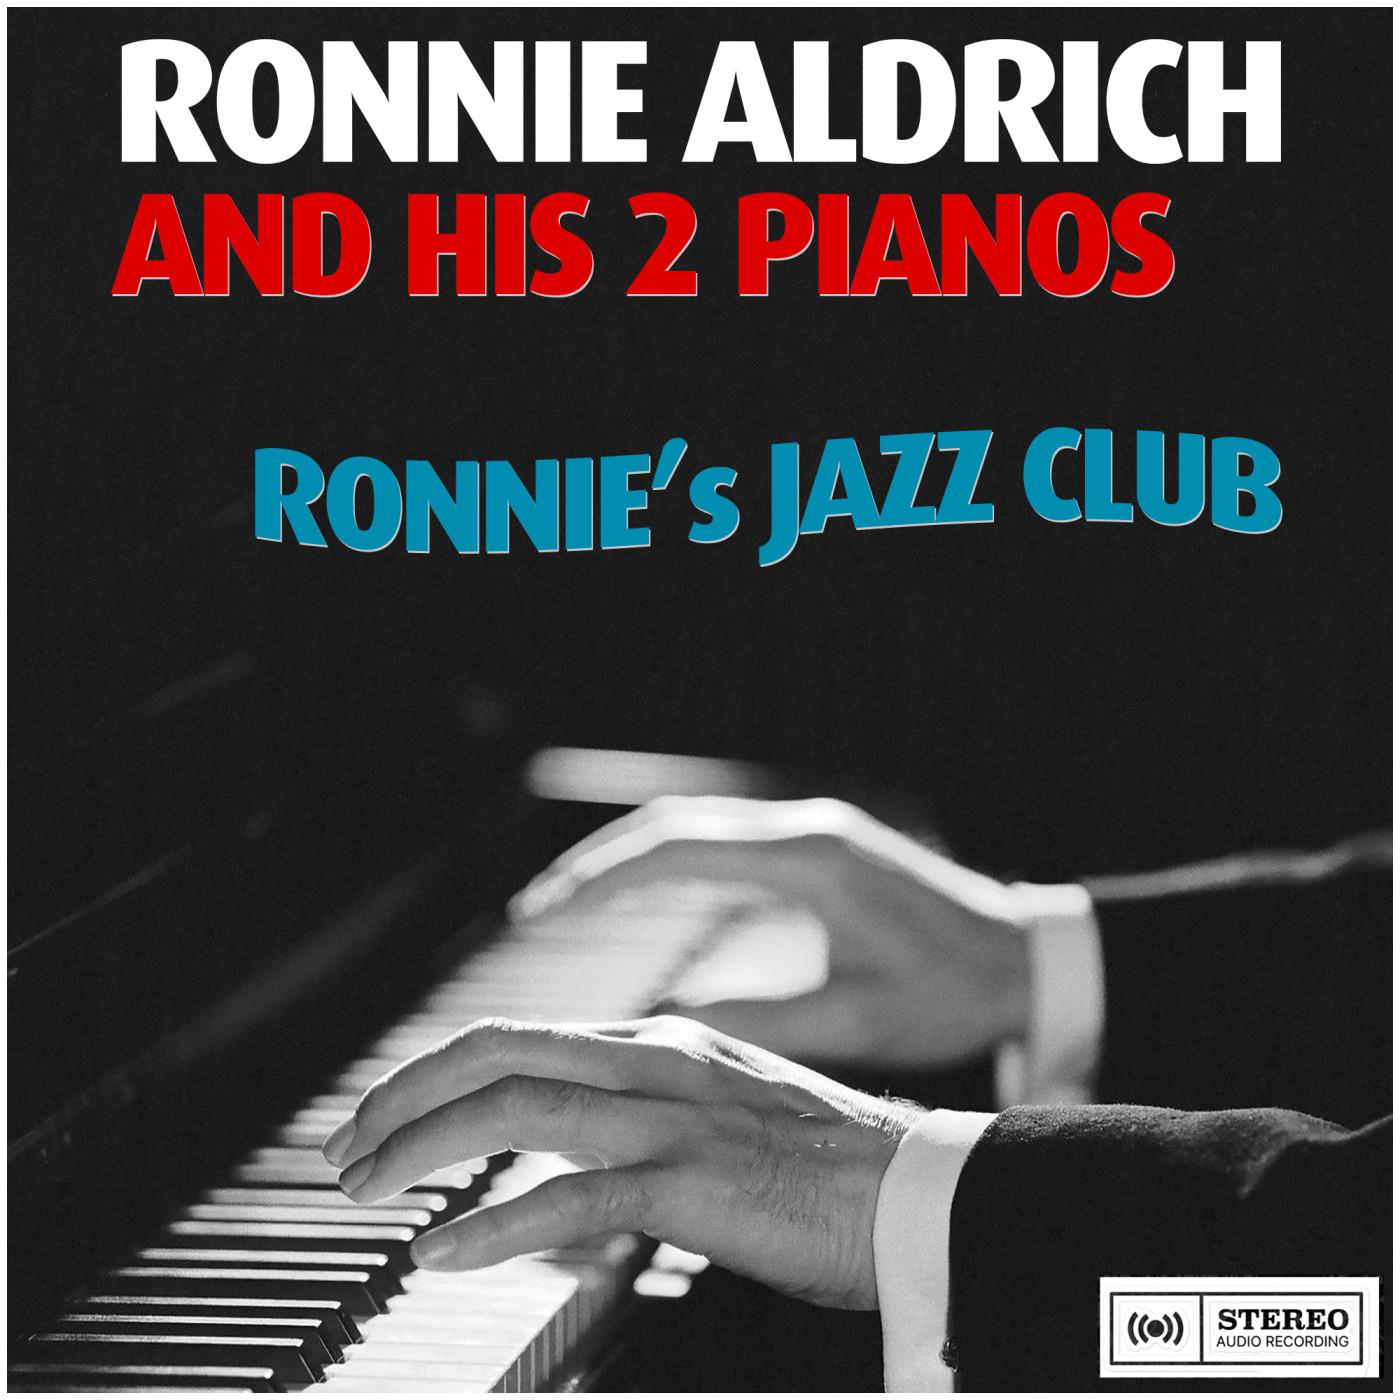 Ronnie Aldrich and his 2 pianos - Ruby